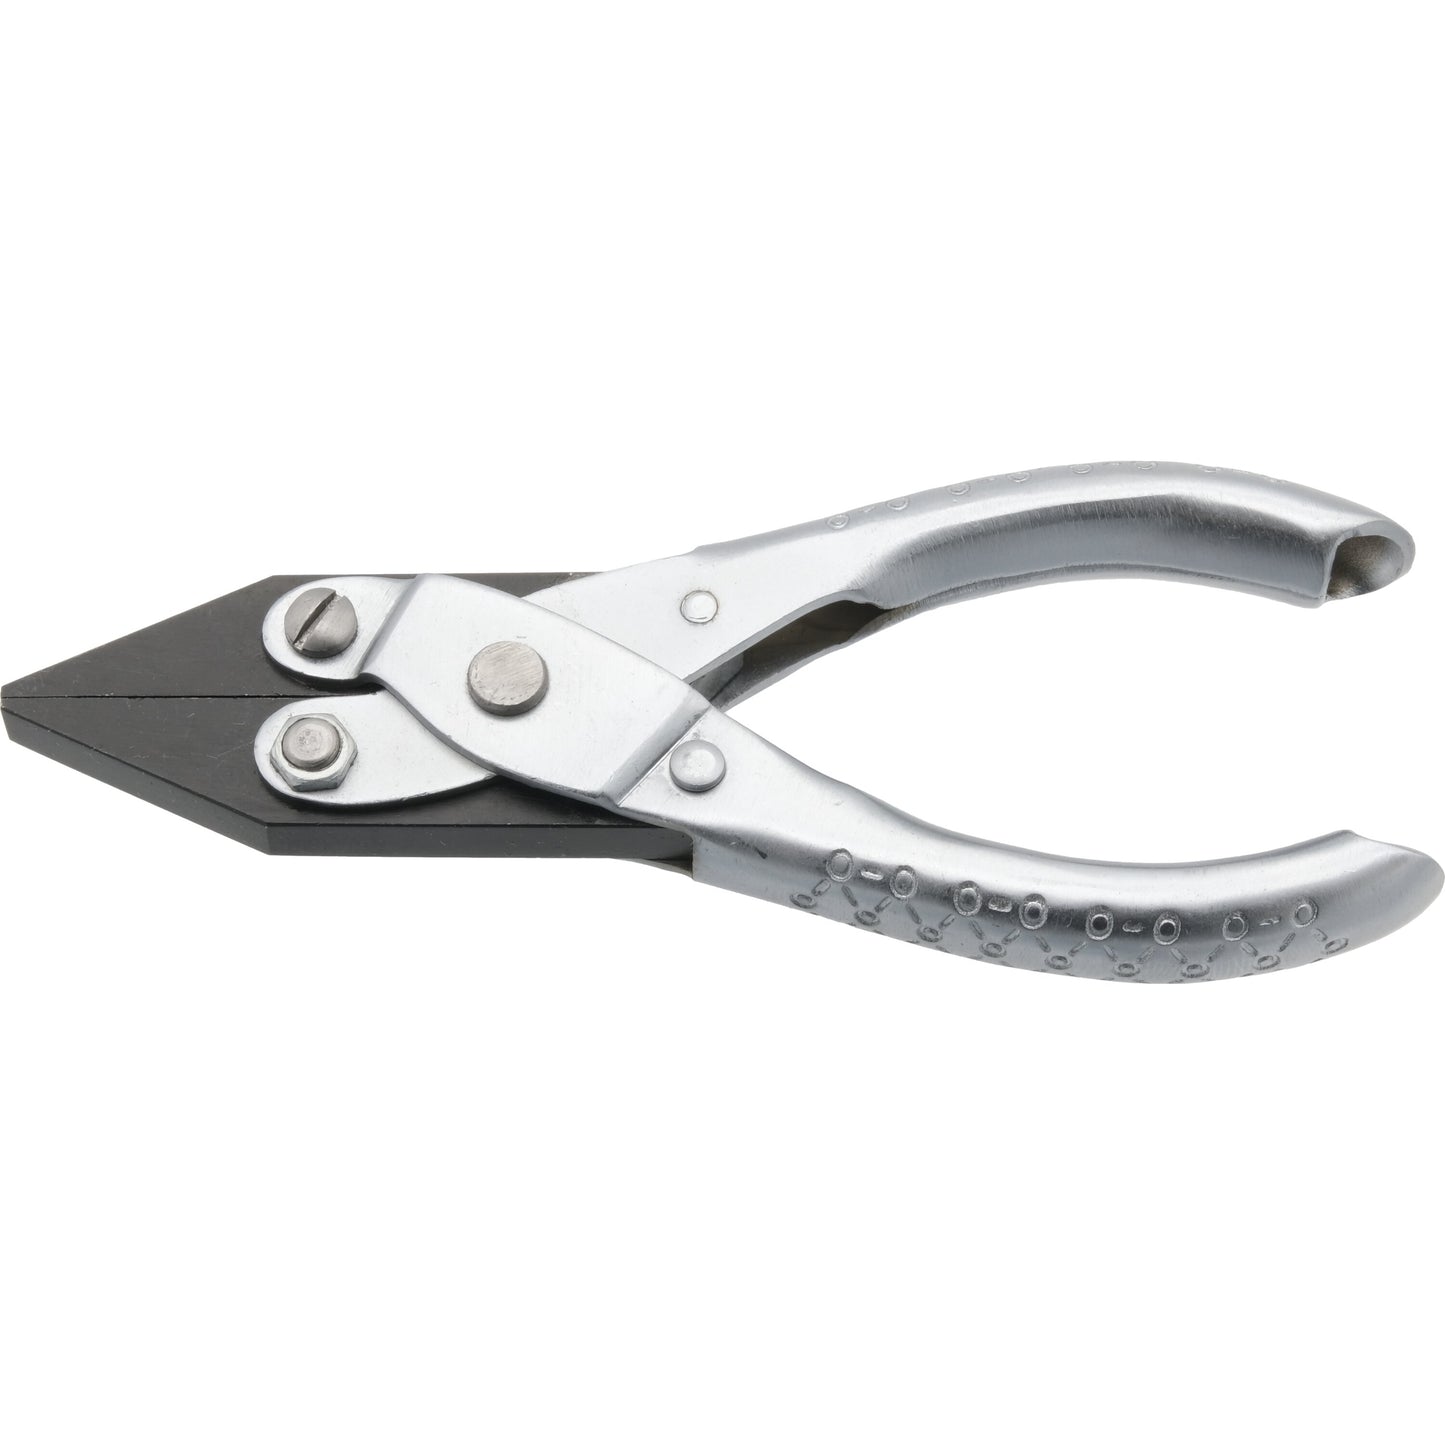 FindingKing Parallel Action Flat Nose Pliers